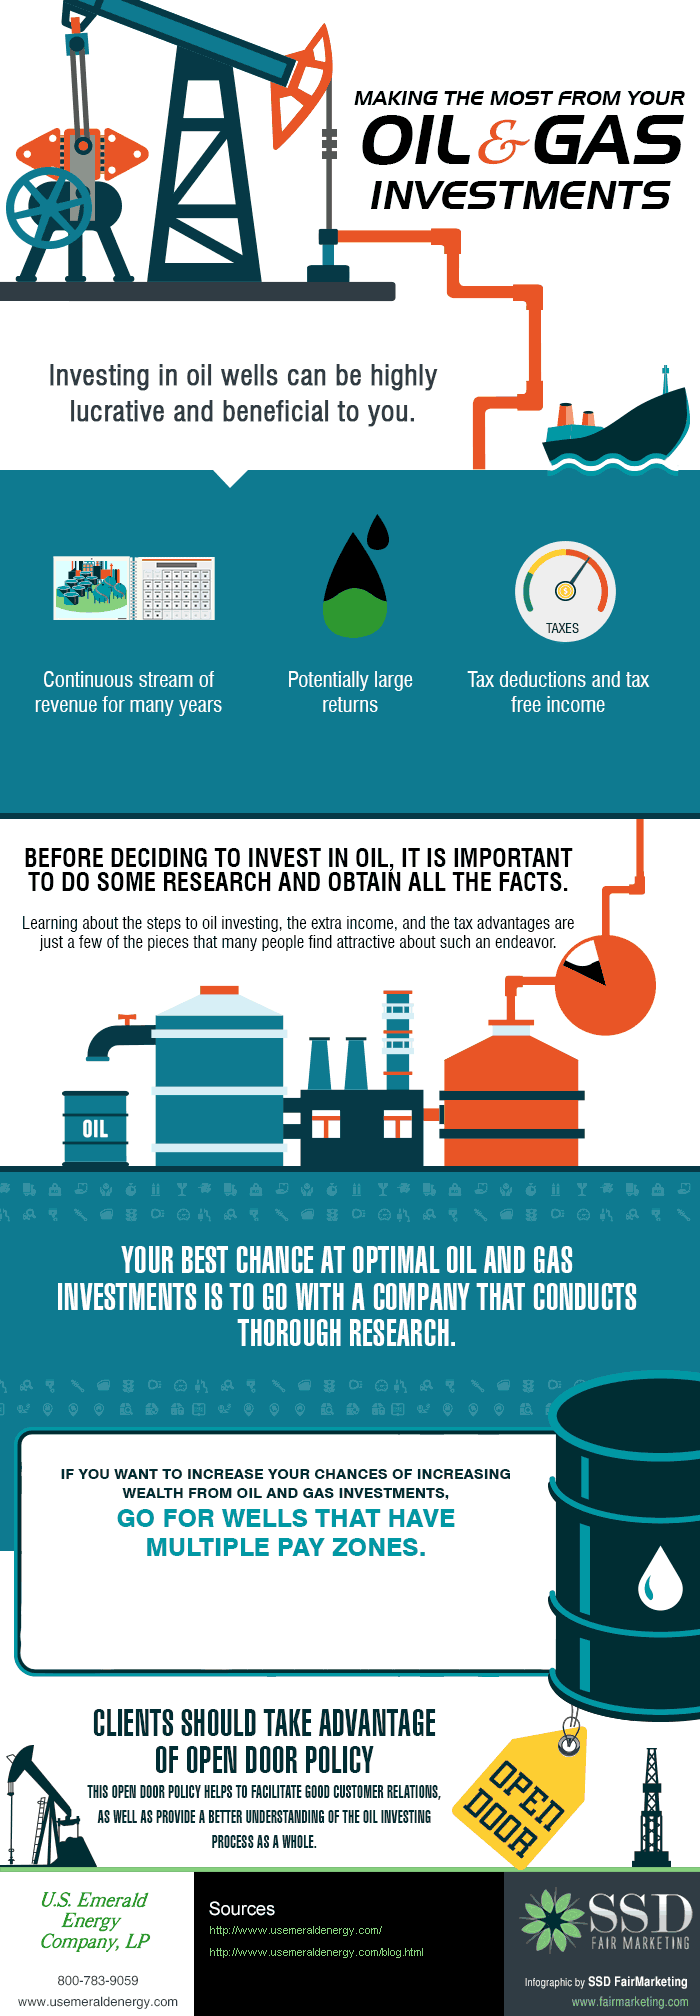 Gifographic on Oil & Gas Investment Infographic